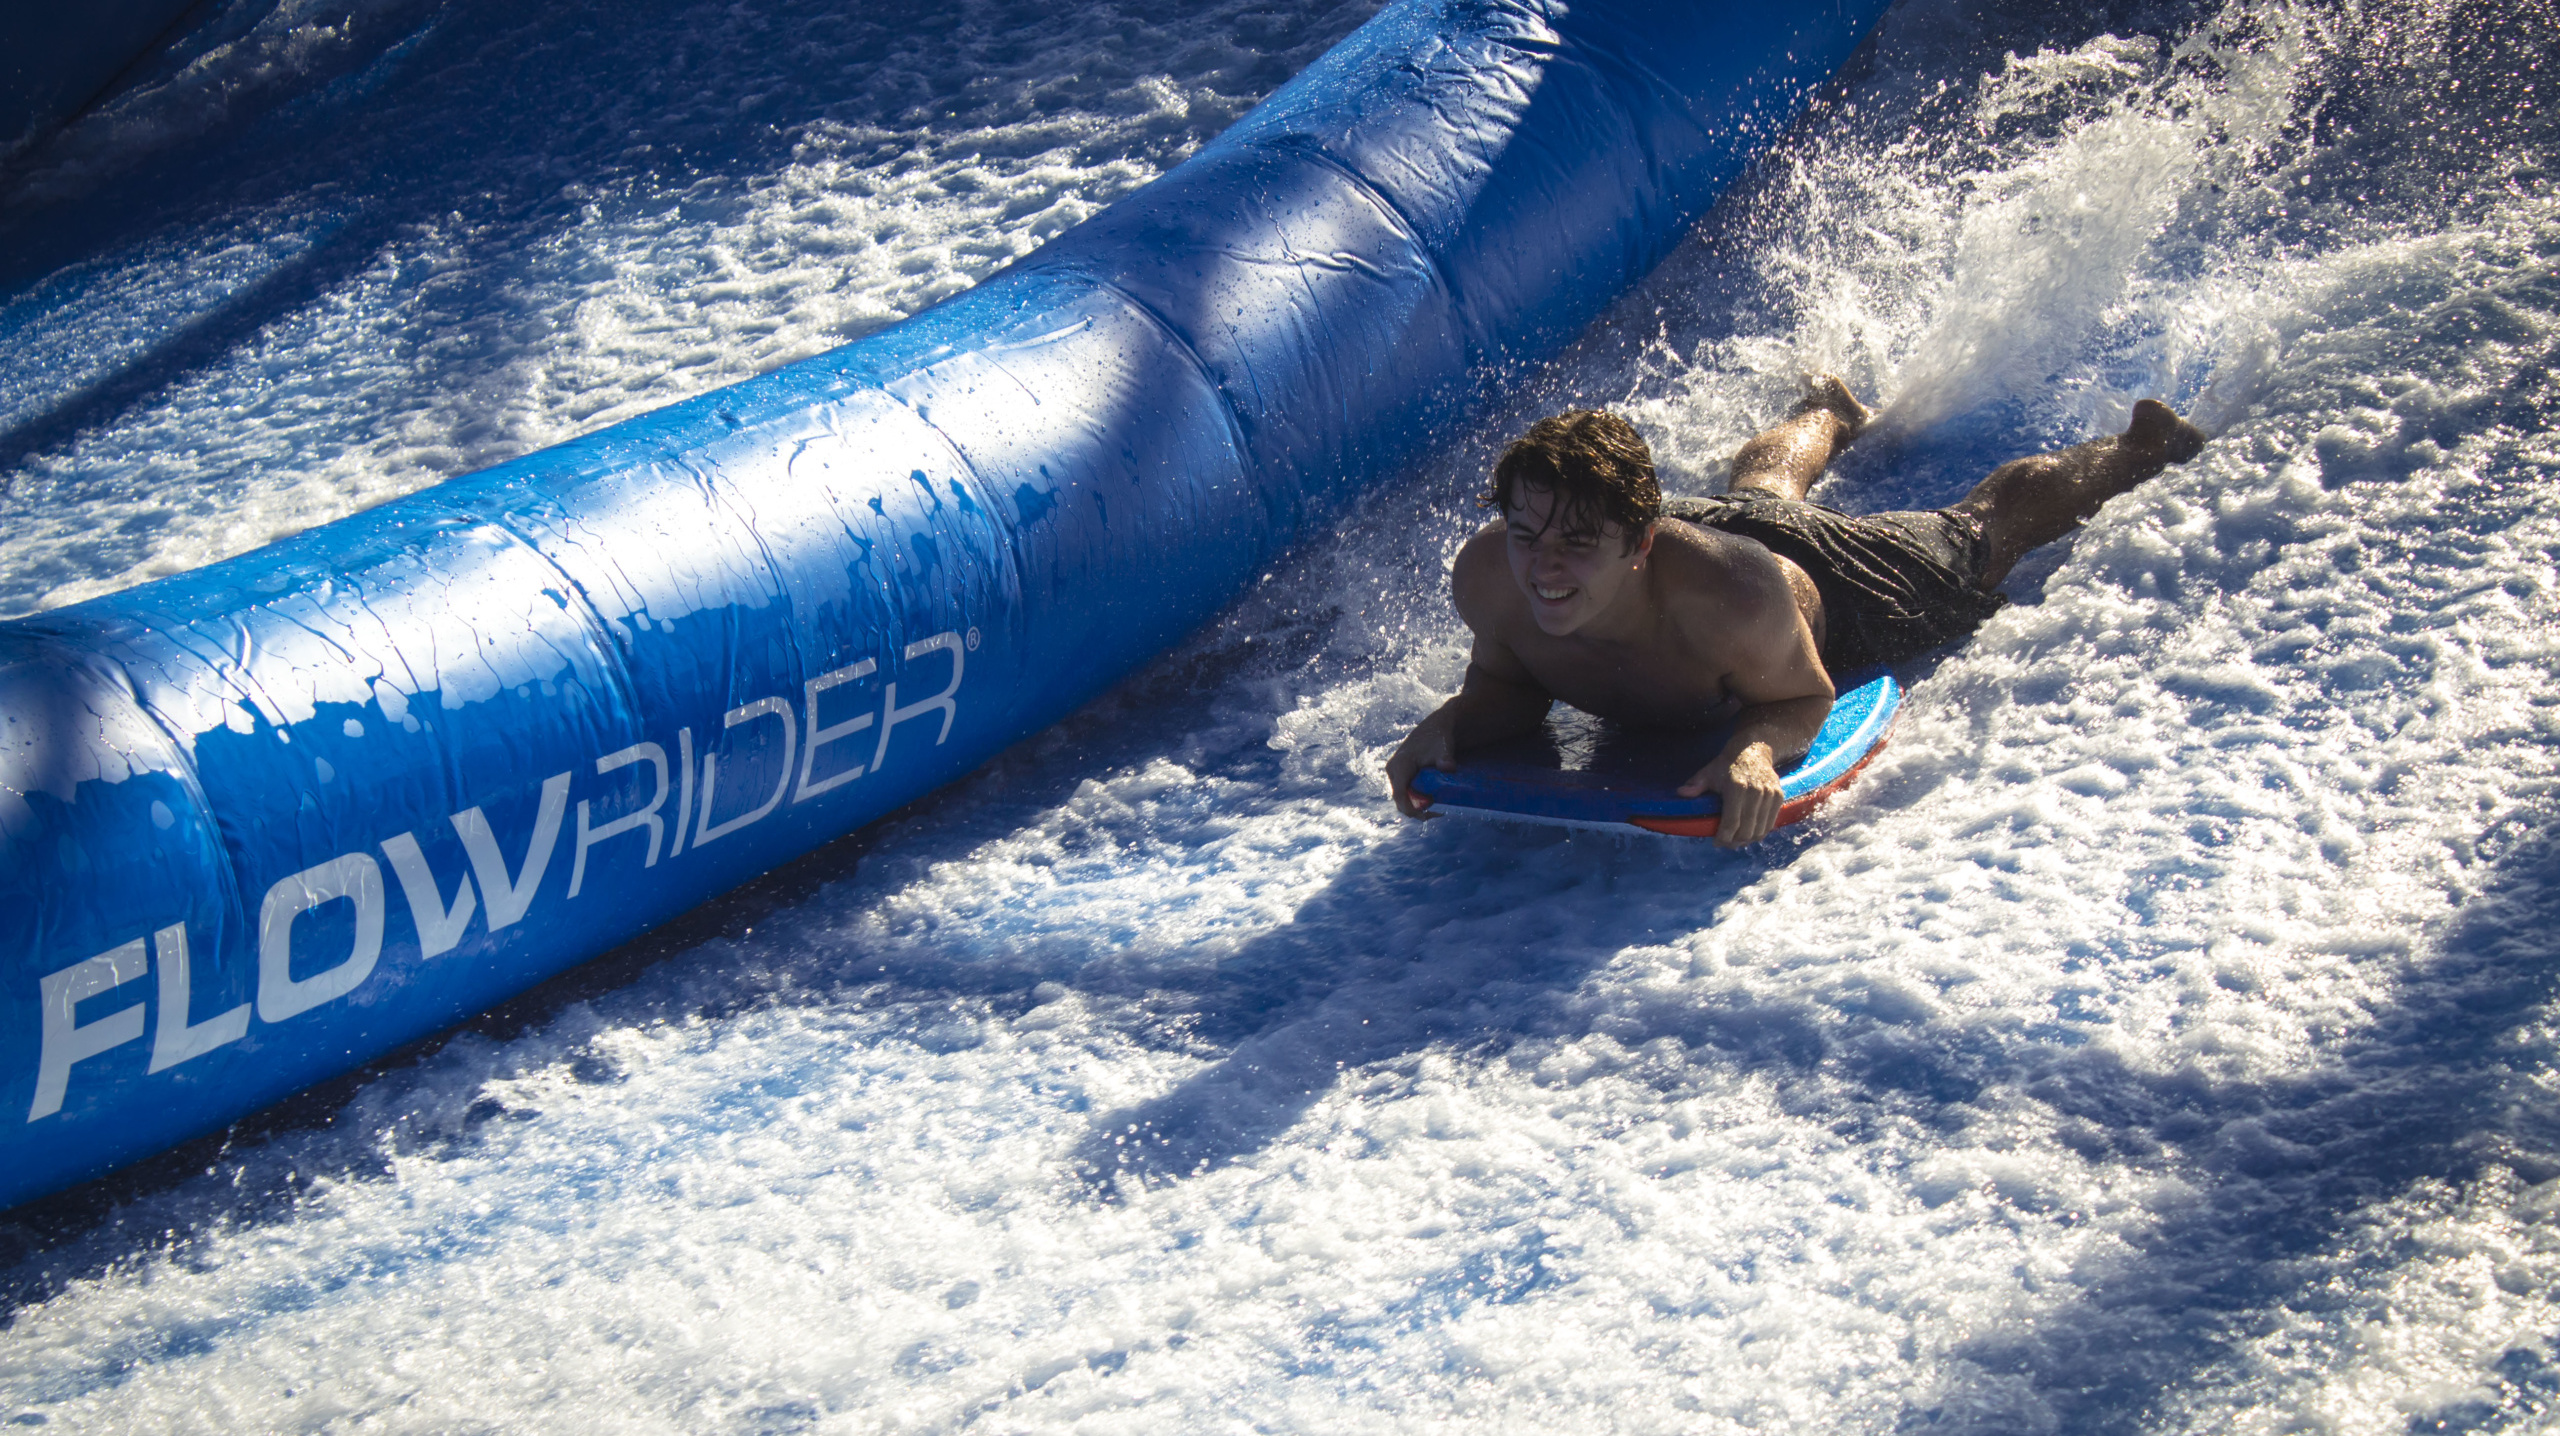 FlowRider Double, EpicWaters, Grand Prairie, USA